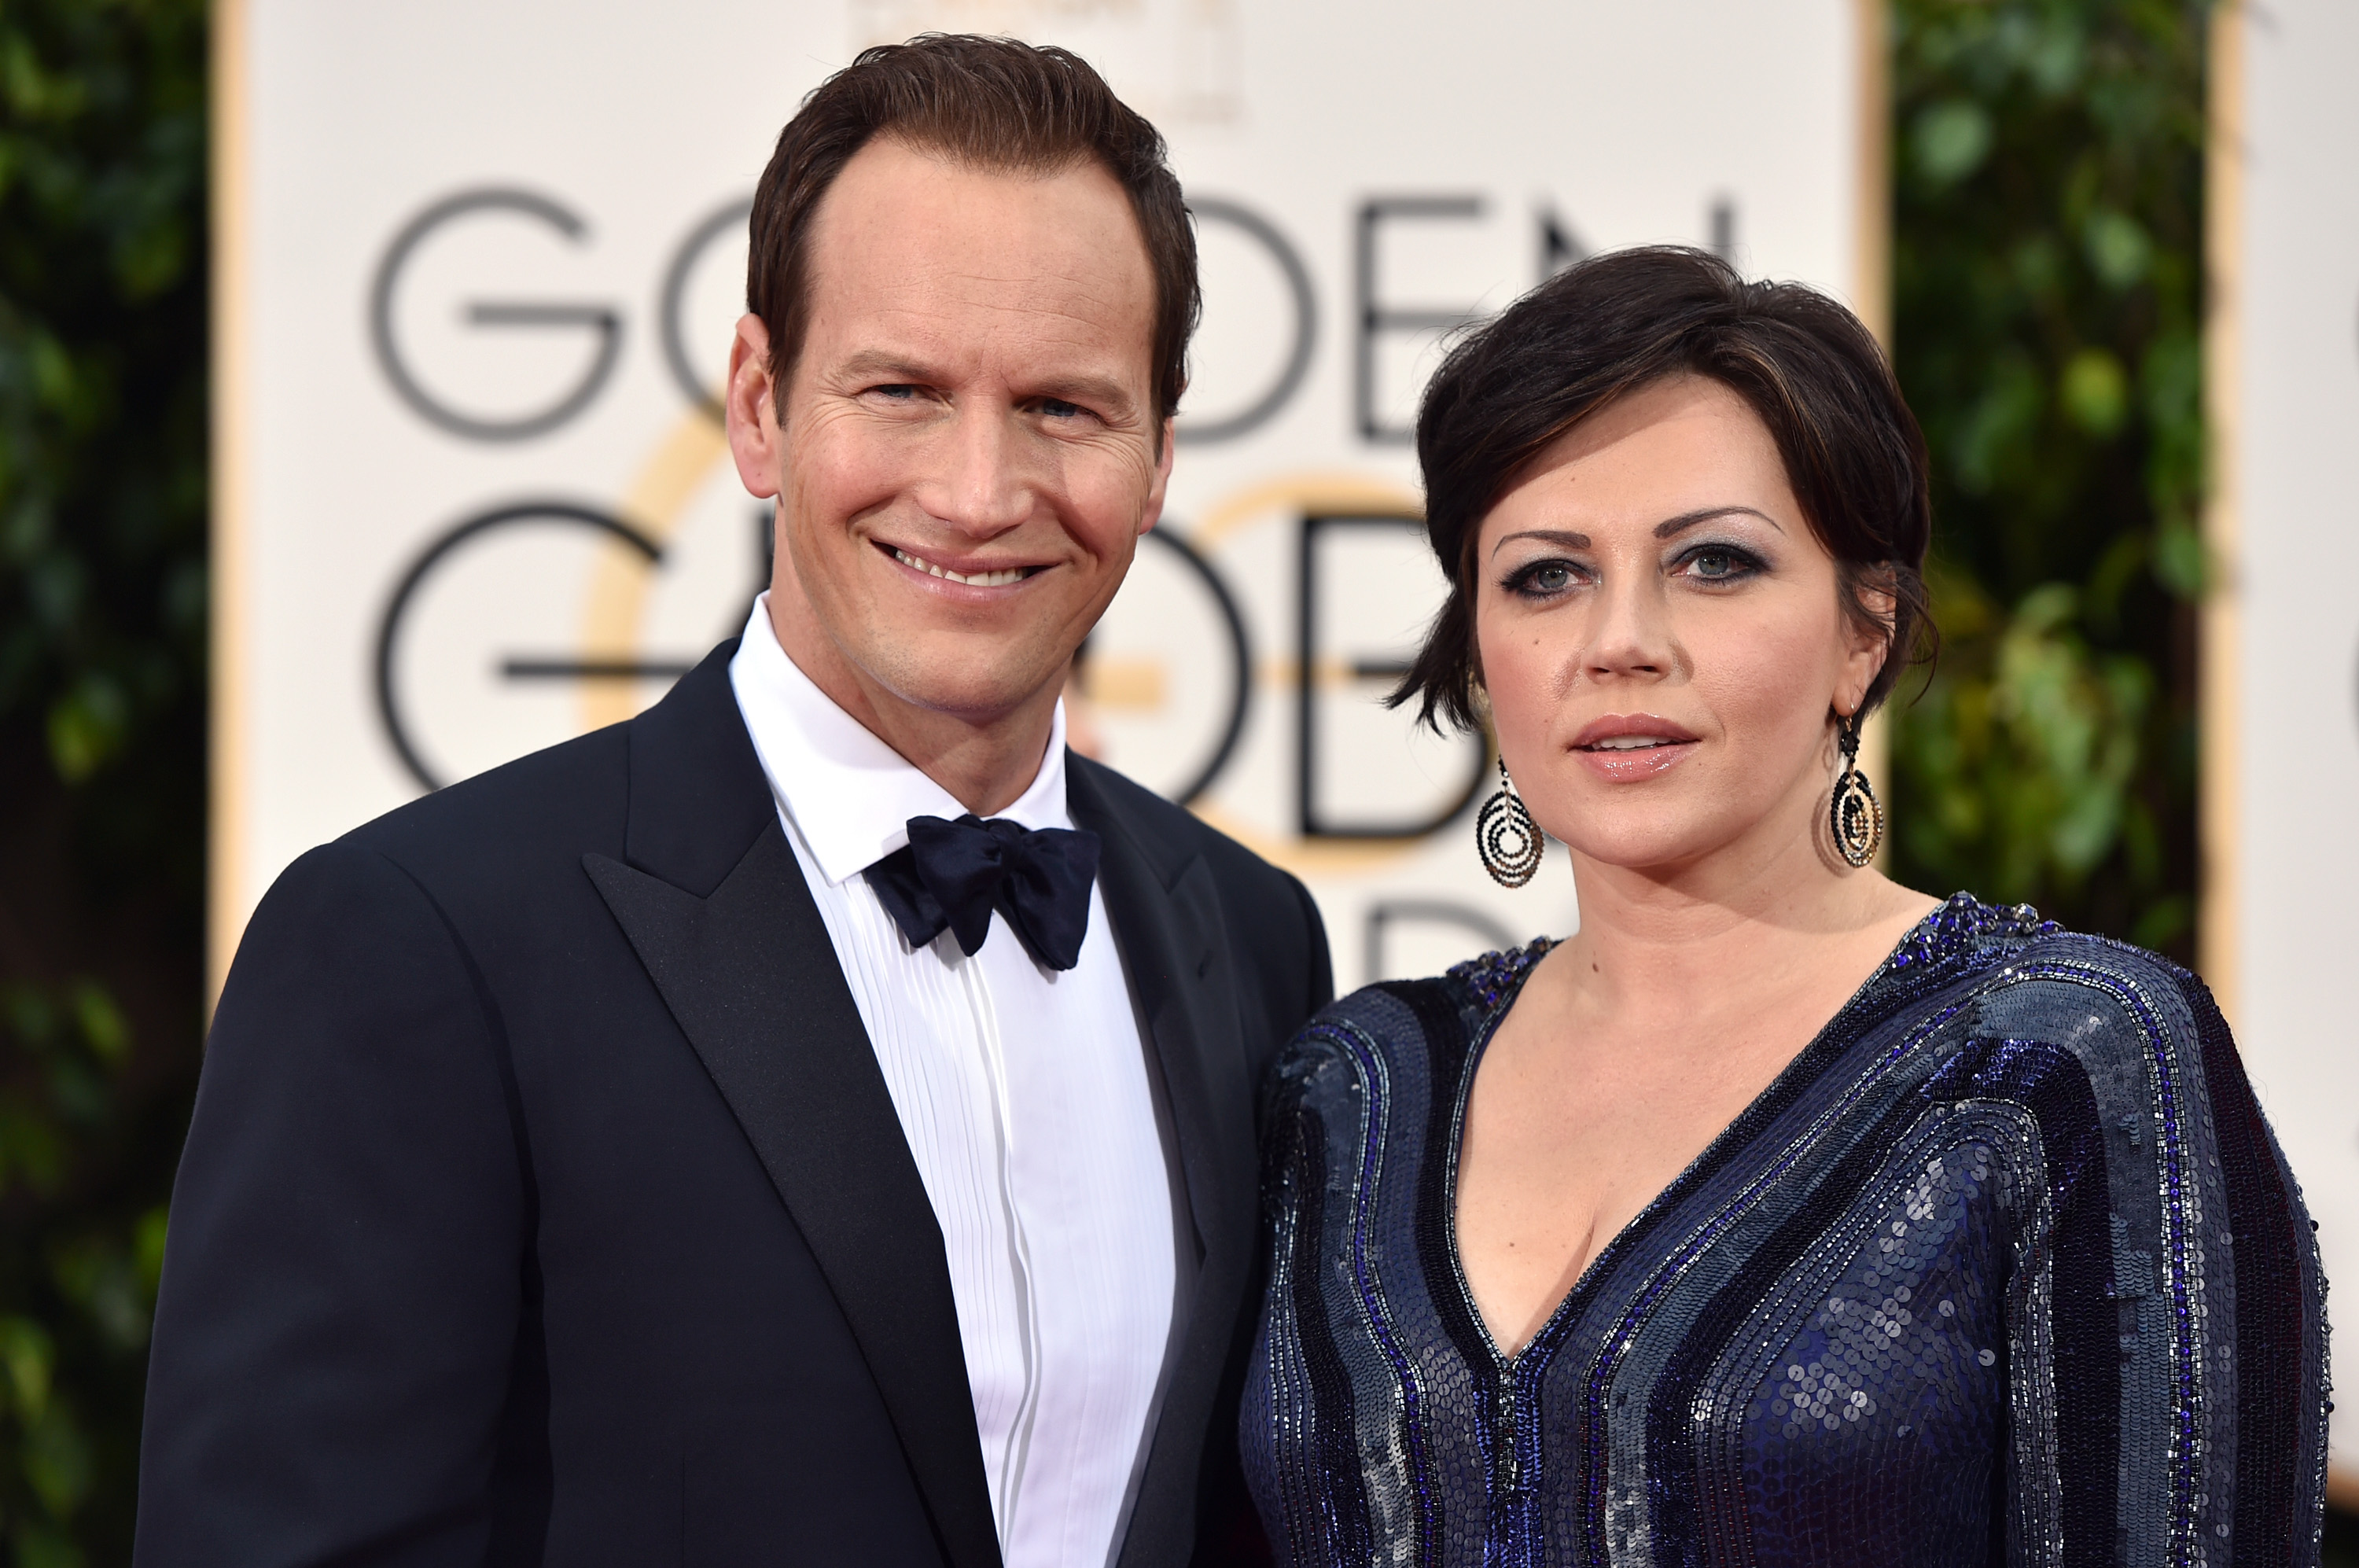 Patrick Wilson and Dagmara Dominczyk at the 73rd Annual Golden Globe Awards on January 10, 2016, in Beverly Hills, California. | Source: Getty Images